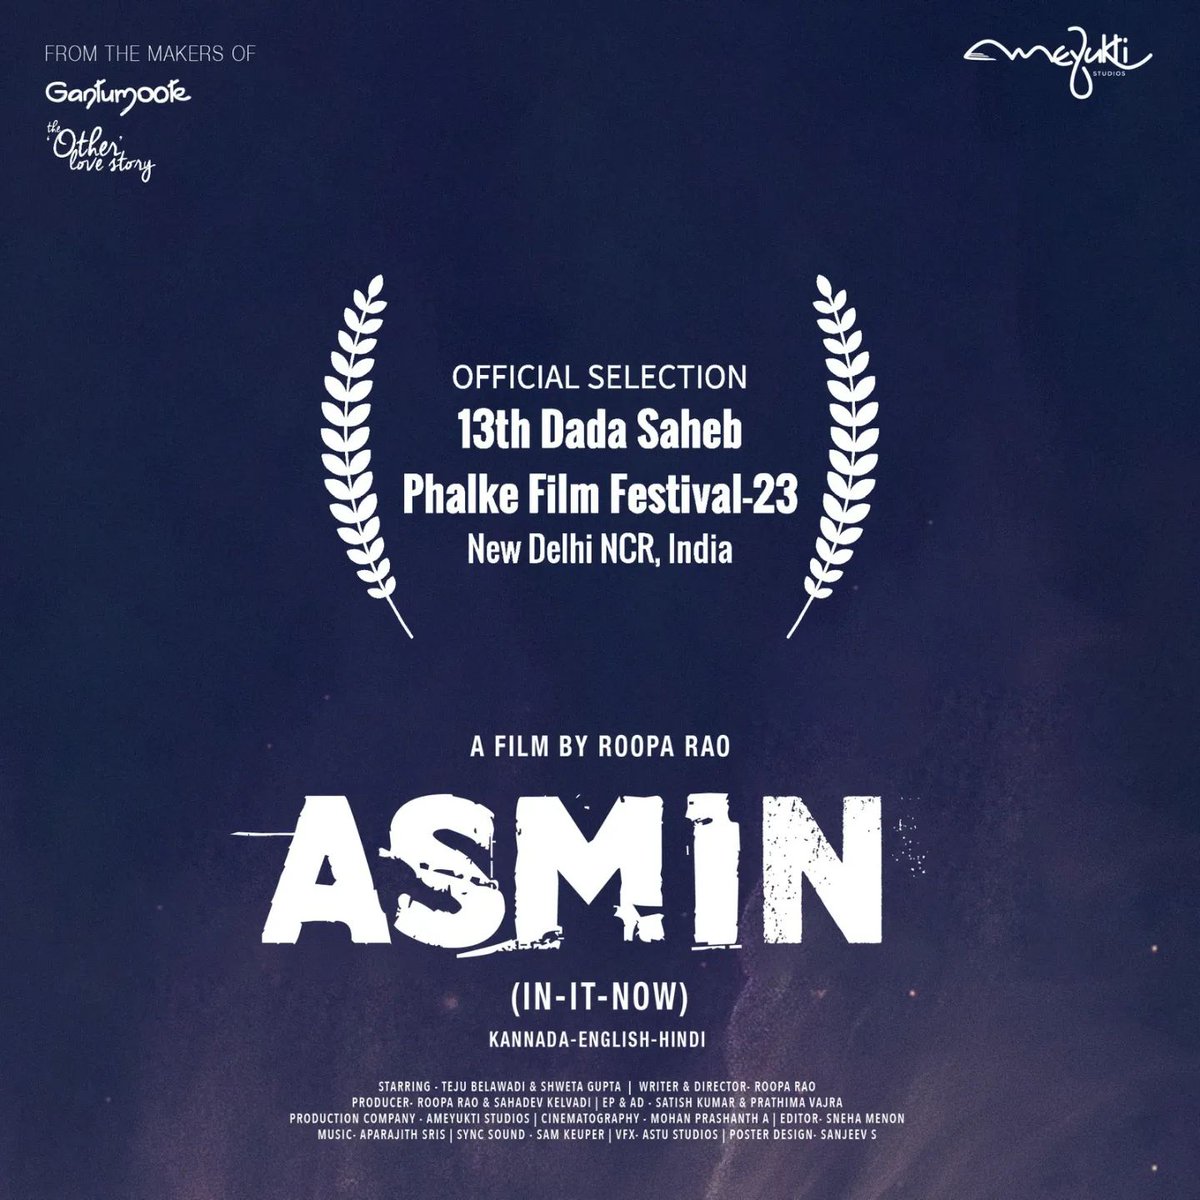 Asmin, in it now a film by Roopa Rao of Gantumoote Fame, has been officially selected for 13th Dada Saheb Phalke Film Festival - 2023

#AsminTheFilm #Gantumoote #RoopaRao #TejuBelavadi #ShwetaGupta